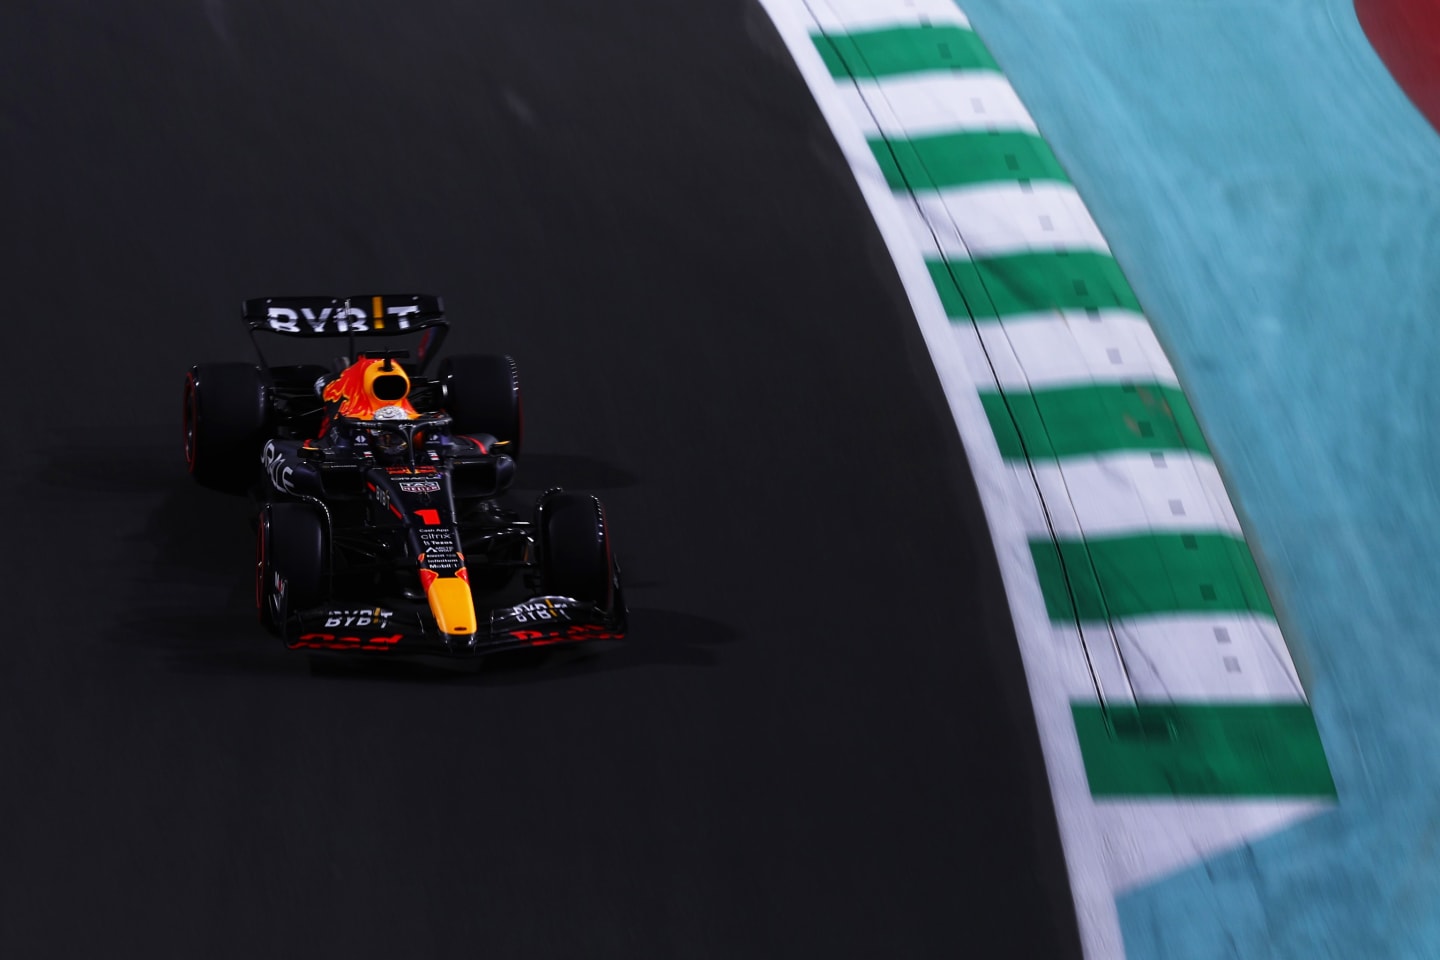 JEDDAH, SAUDI ARABIA - MARCH 26: Max Verstappen of the Netherlands driving the (1) Oracle Red Bull Racing RB18 on track during qualifying ahead of the F1 Grand Prix of Saudi Arabia at the Jeddah Corniche Circuit on March 26, 2022 in Jeddah, Saudi Arabia. (Photo by Lars Baron/Getty Images)